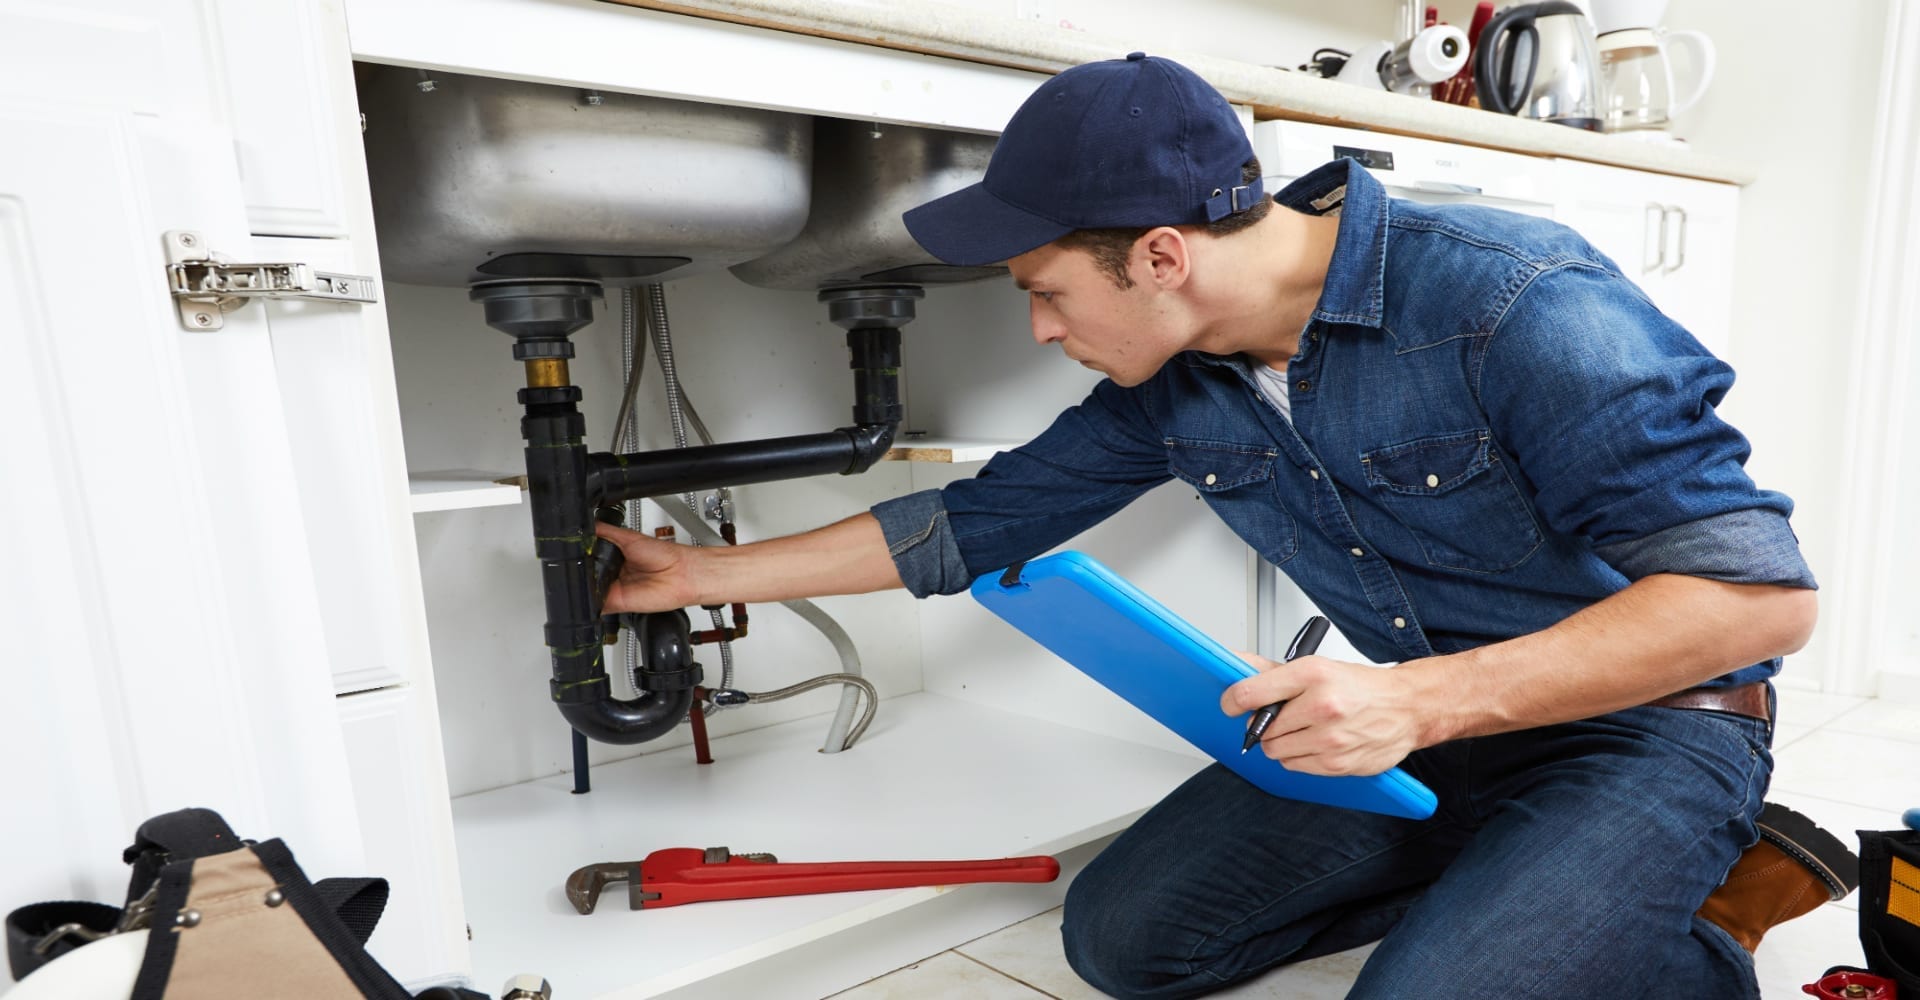 How to Find a Plumber on the Internet